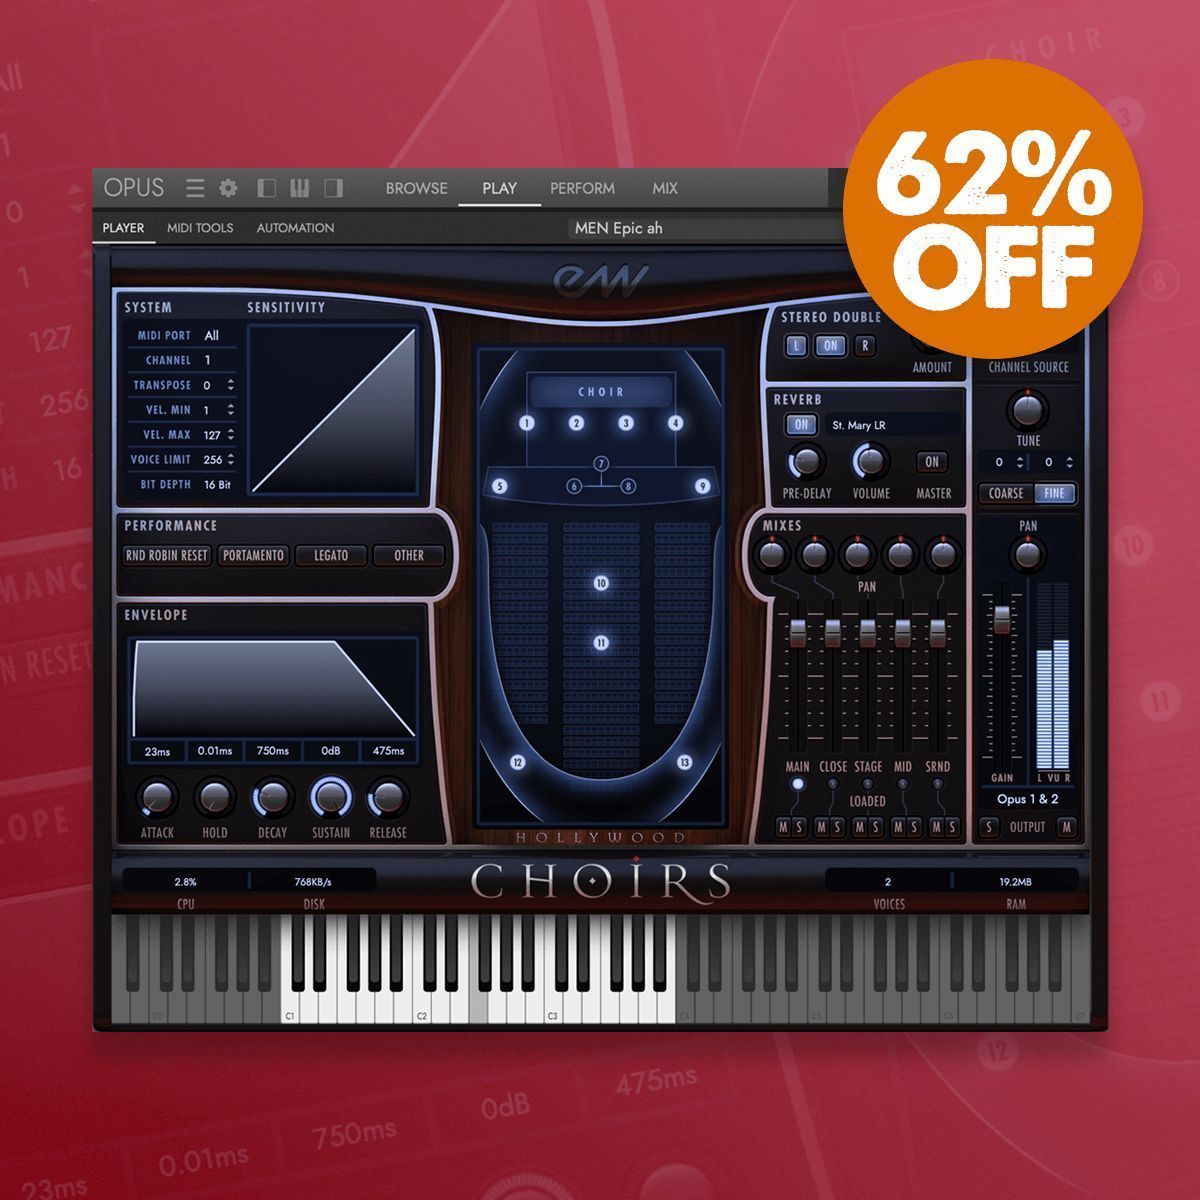 EastWest May Sale 🎹
Save 62% on Hollywood Choirs Diamond Edition • Only $149!

Buy here: pluginfox.com/products/east-…

Sale ends May 19th ⏰

@eastwestsounds #eastwest #eastwestsounds #plugindeals #pluginsales #dtm #pluginfox #virtualinstruments #samplelibraries #plugins #vstplugins